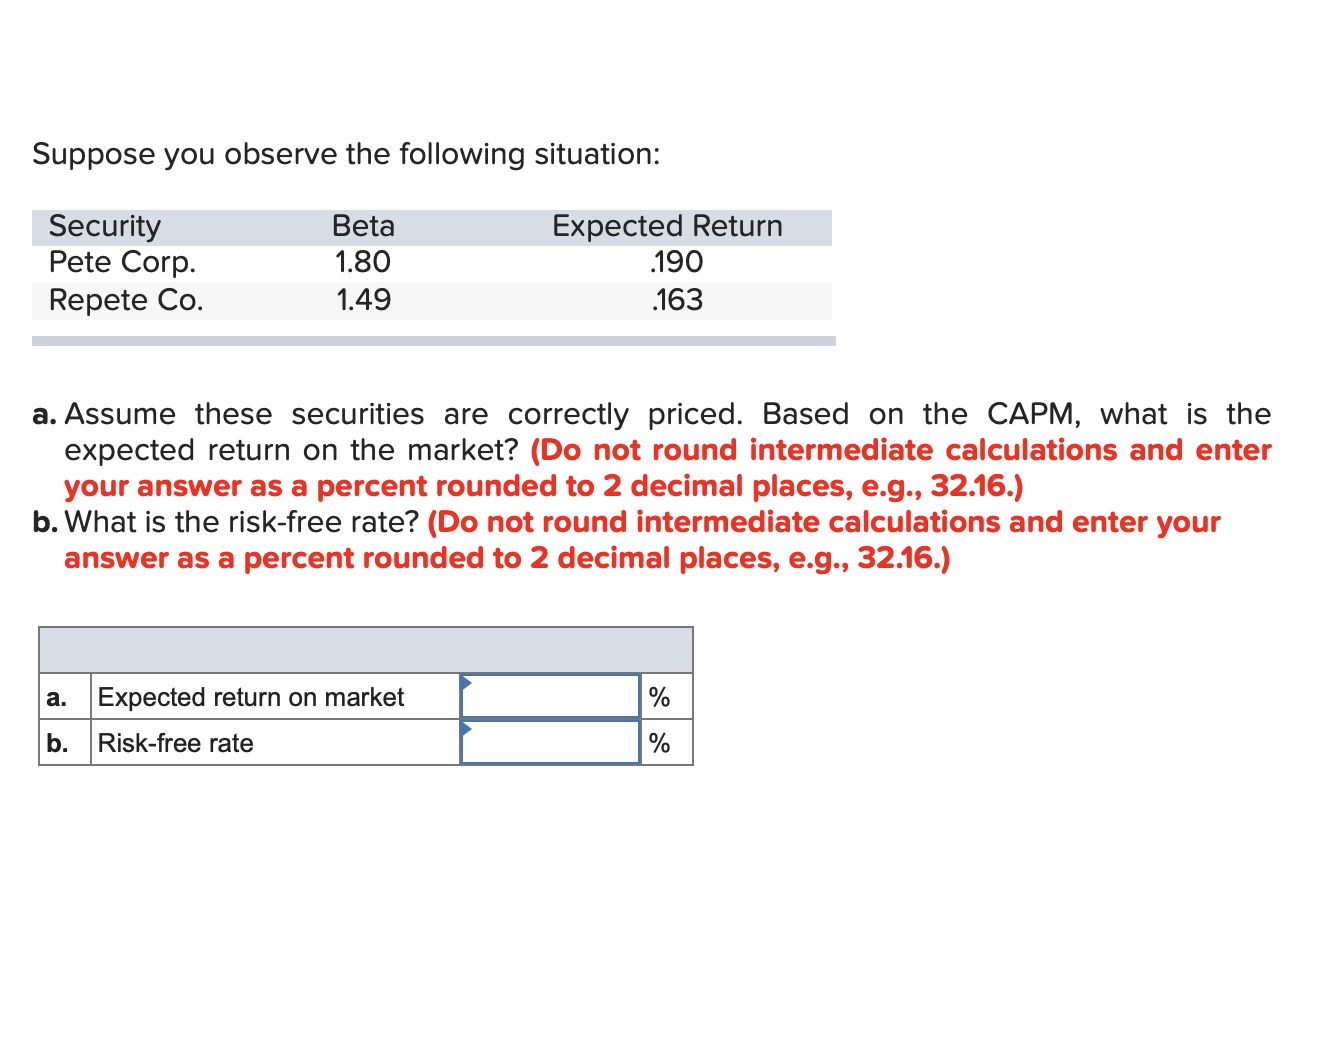 Suppose you observe the following situation:
Security
Pete Corp.
Expected Return
.190
Beta
1.80
Repete Co.
1.49
.163
a. Assume these securities are correctly priced. Based on the CAPM, what is the
expected return on the market? (Do not round intermediate calculations and enter
your answer as a percent rounded to 2 decimal places, e.g., 32.16.)
b. What is the risk-free rate? (Do not round intermediate calculations and enter your
answer as a percent rounded to 2 decimal places, e.g., 32.16.)
a. Expected return on market
b.
Risk-free rate
